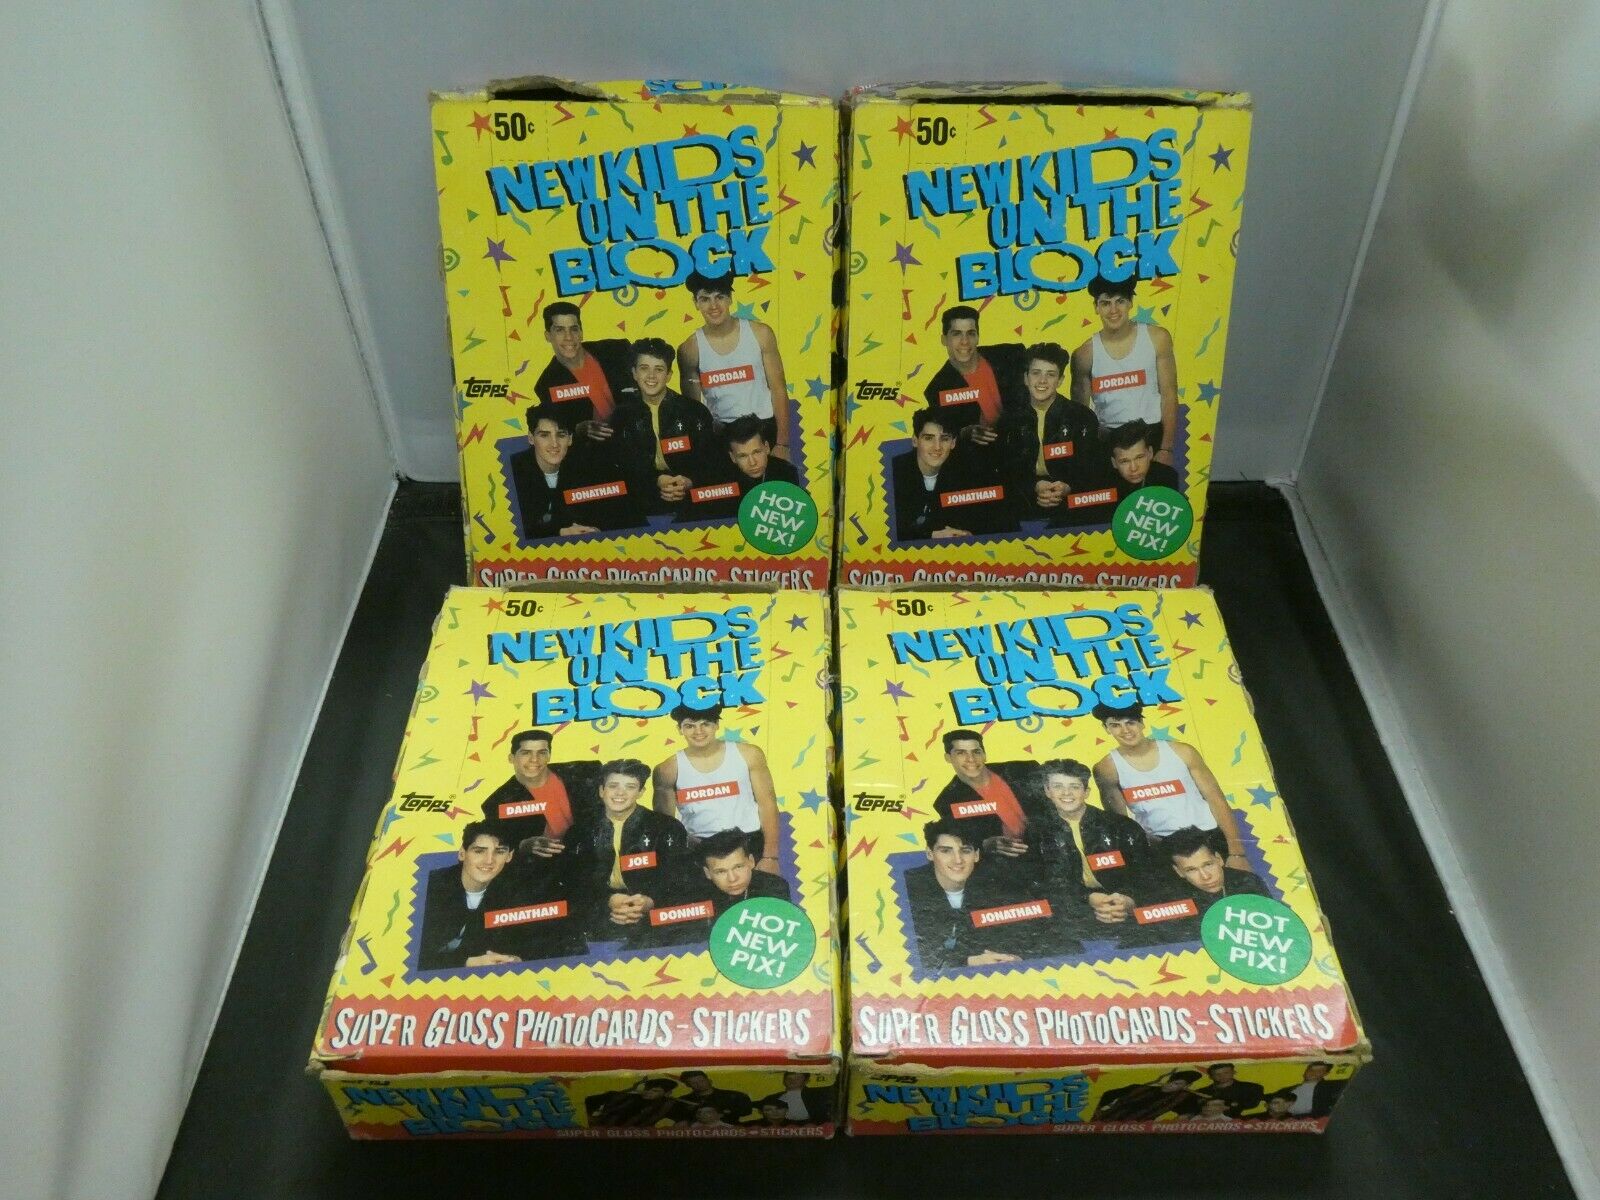 1989 Topps New Kids On The Blocks Cards And Stickers Lot Of 4 Boxes